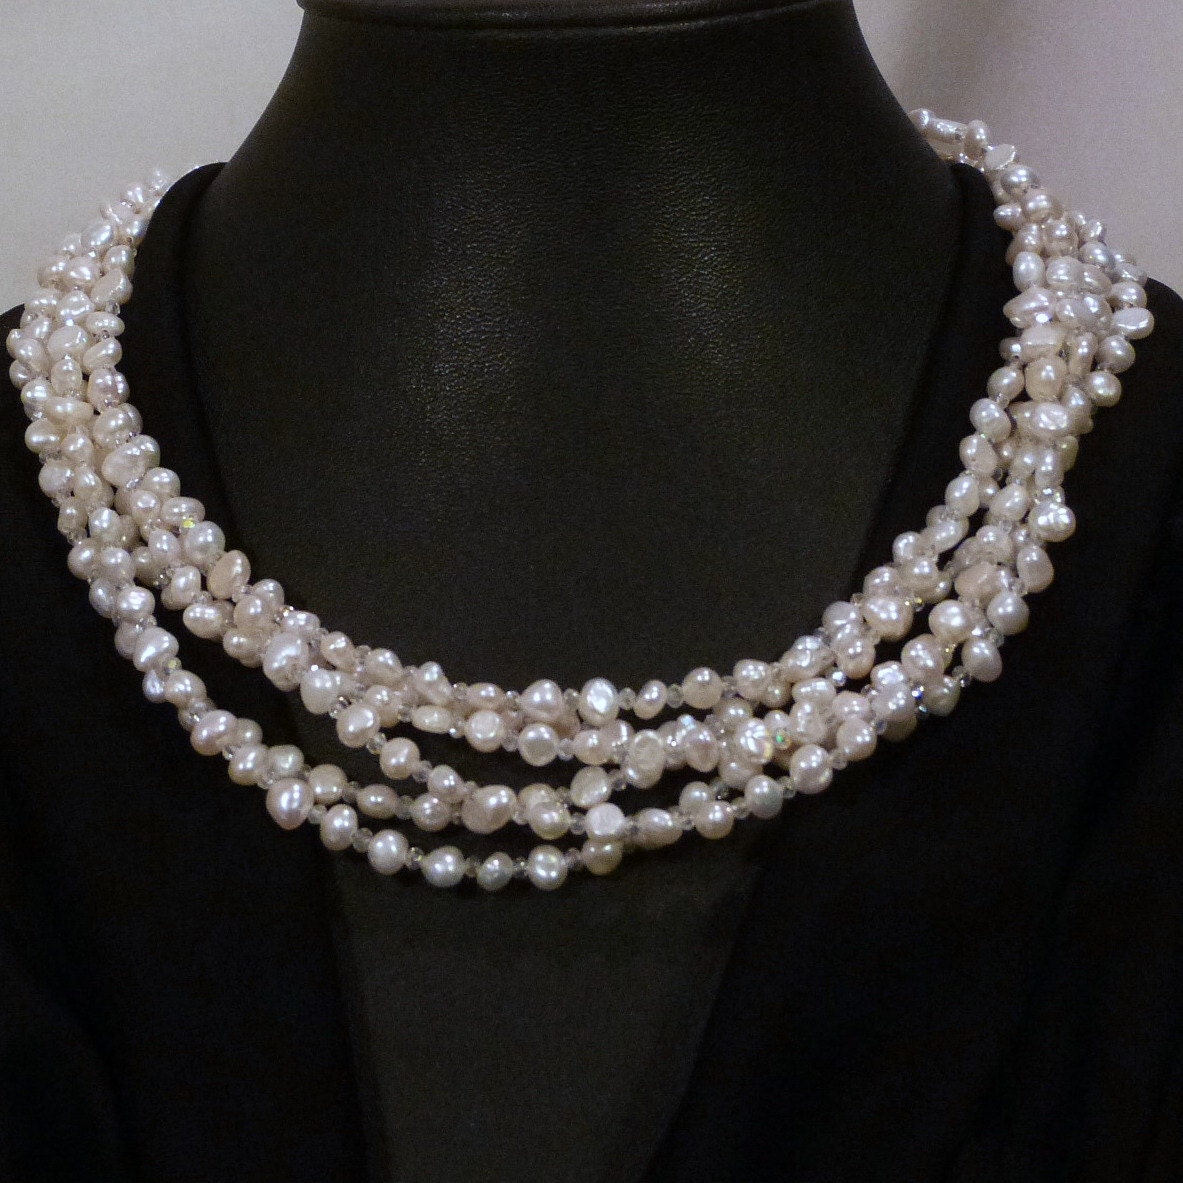 6 Strand Freshwater Pearl and Crystal Choker - Etsy